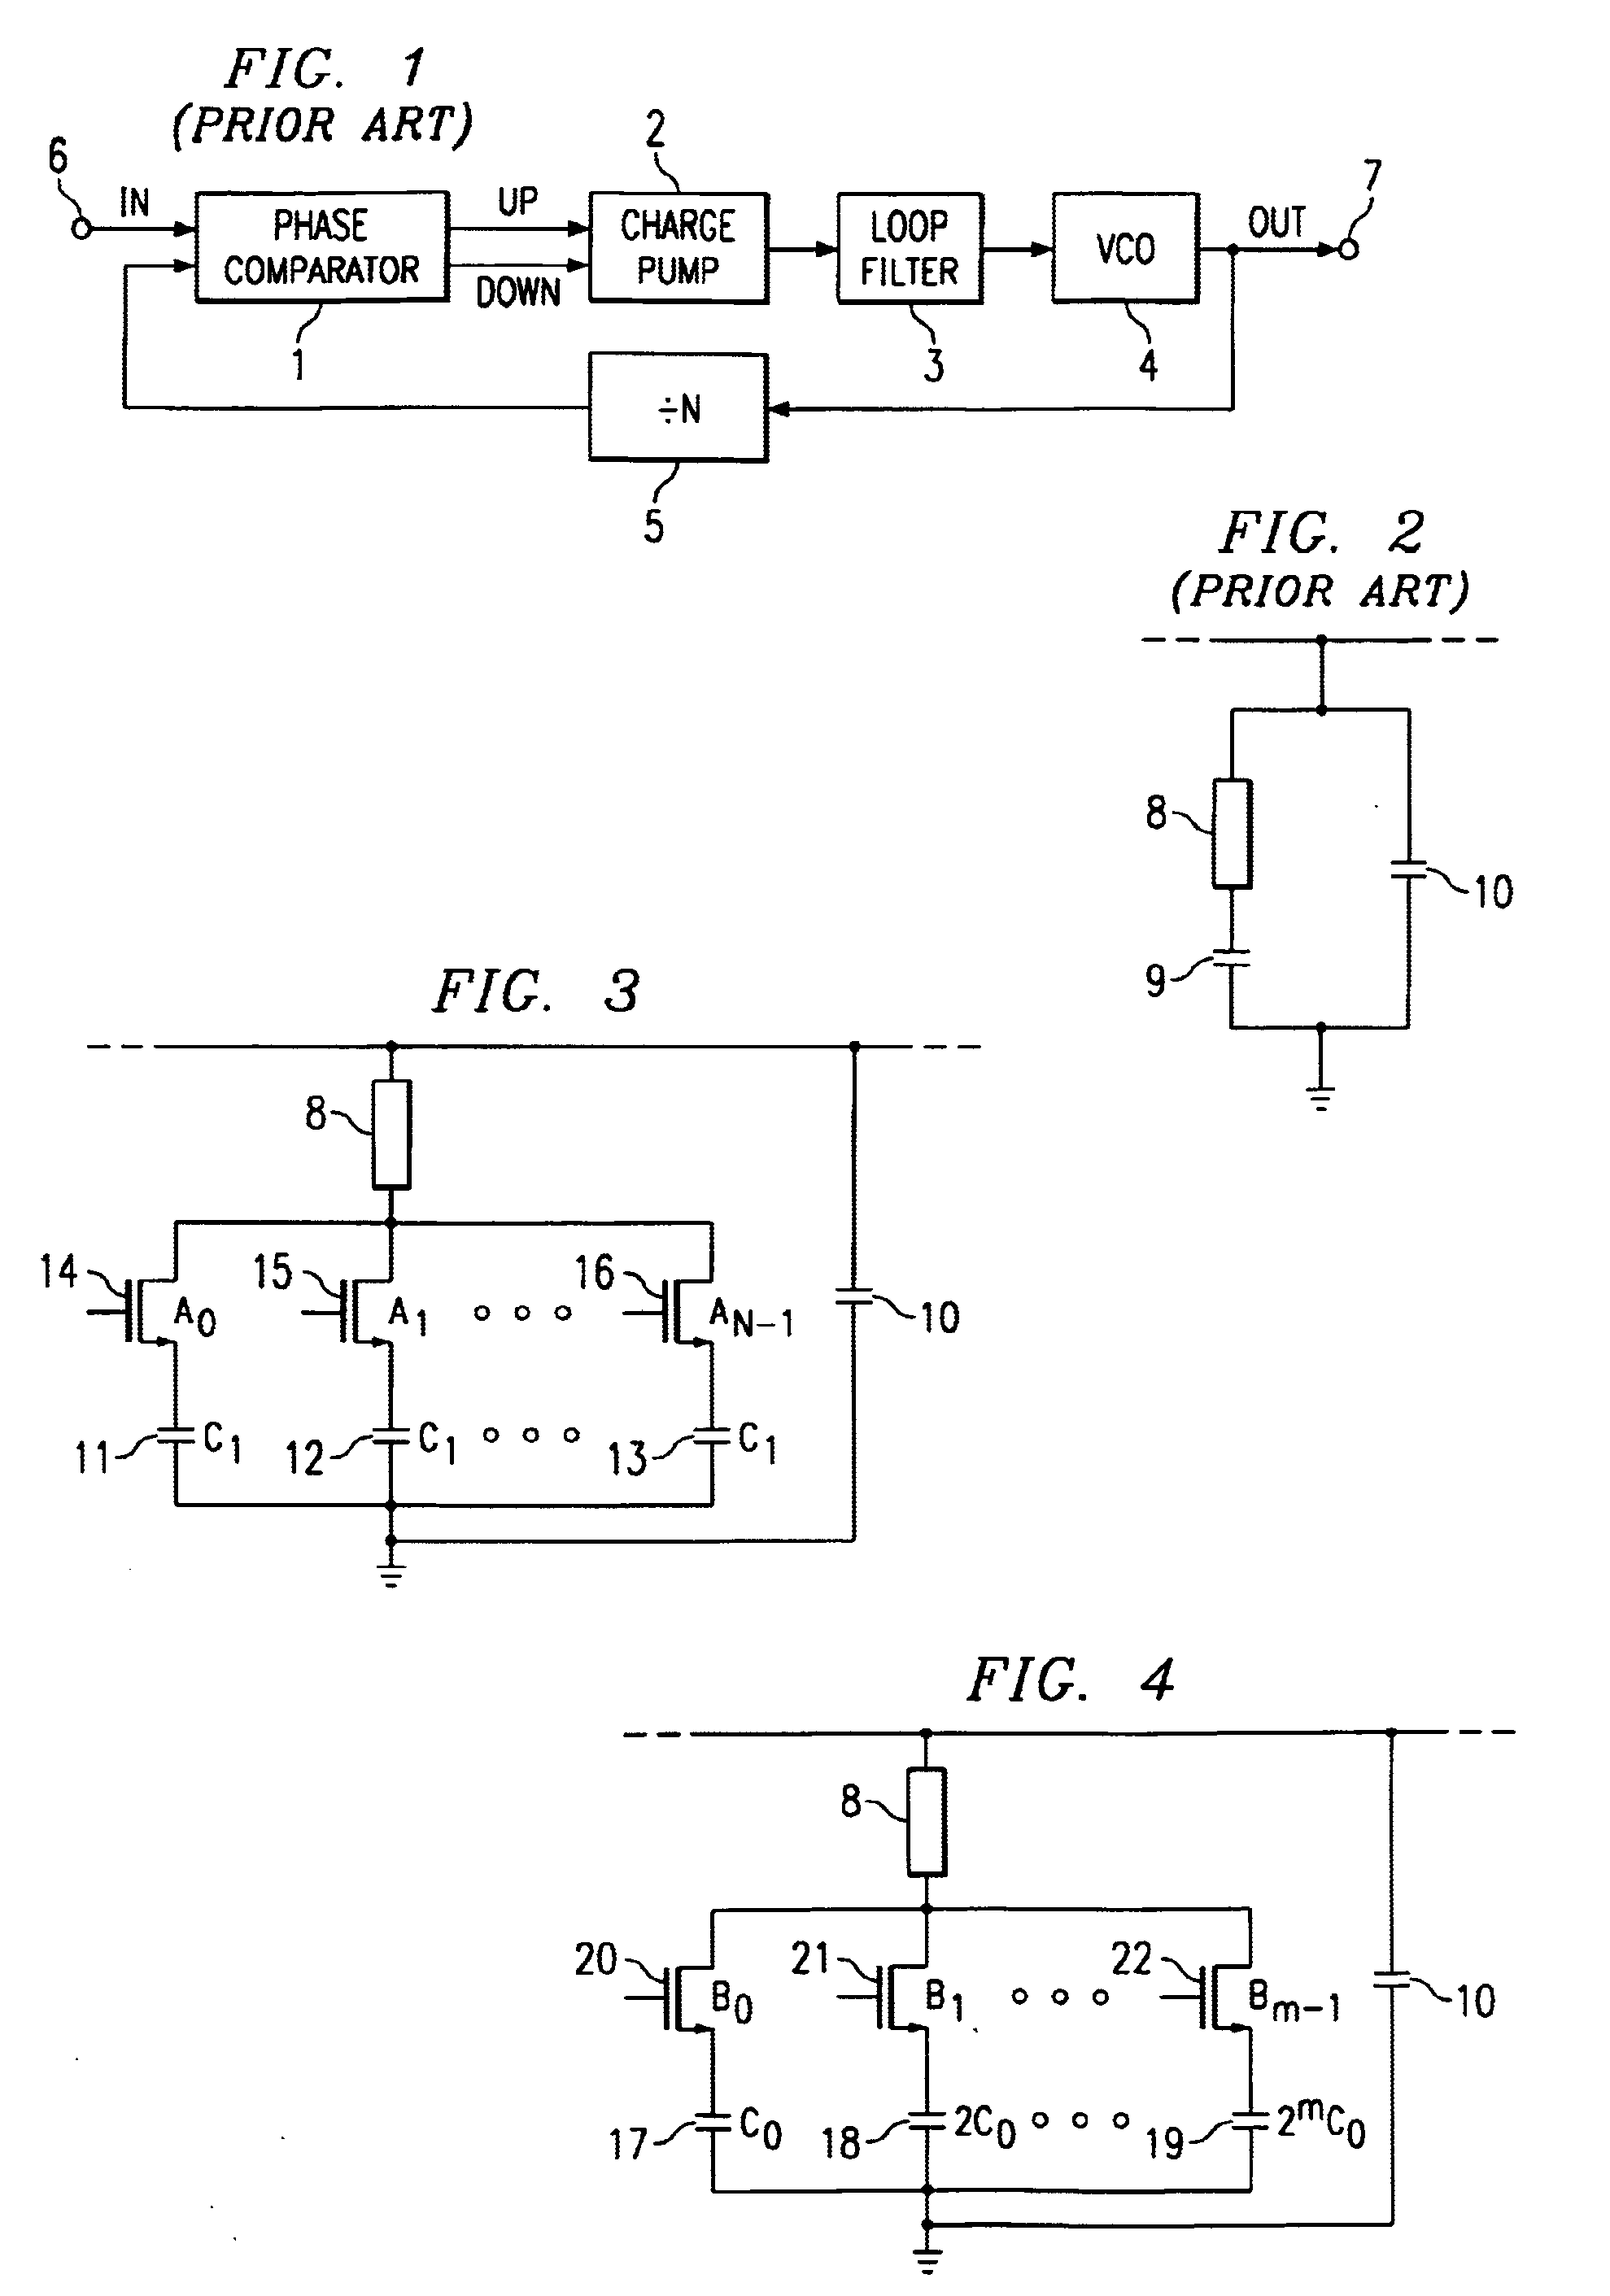 Use of configurable capacitors to tune a self biased phase locked loop